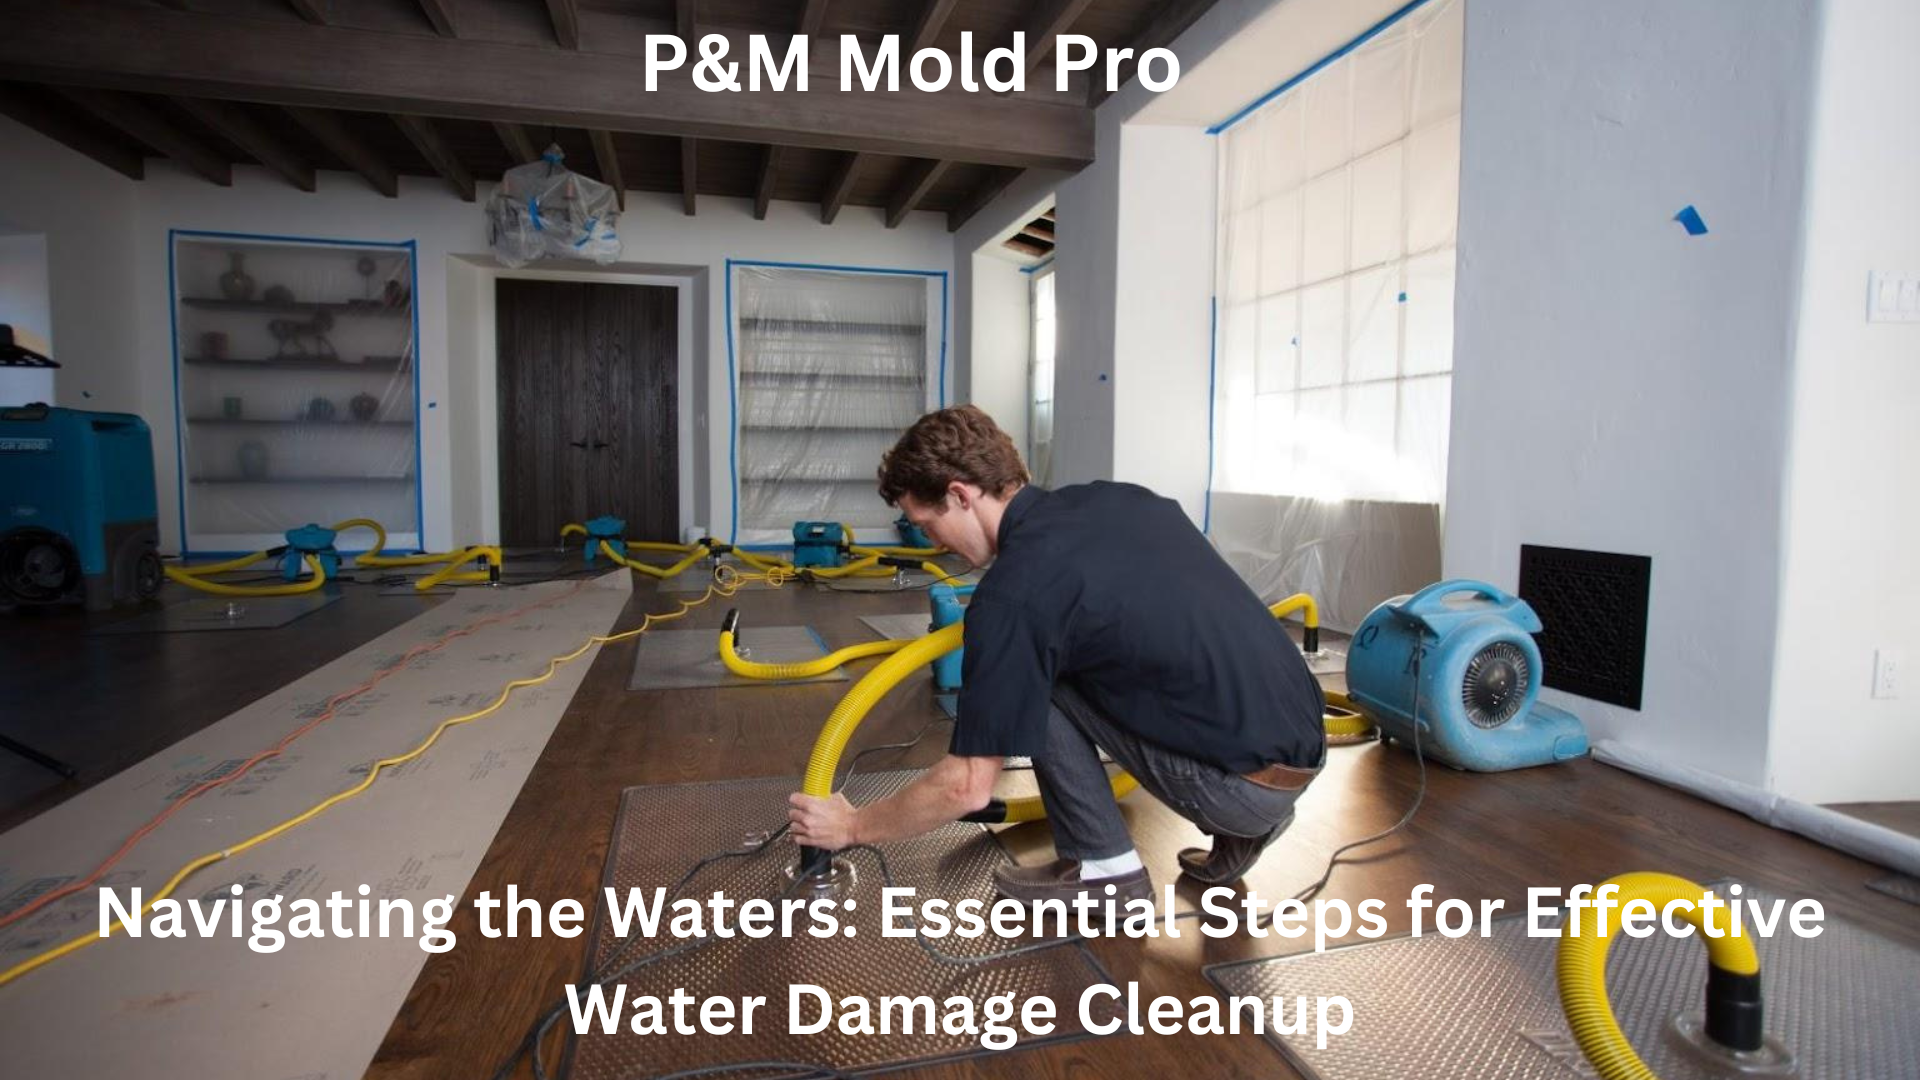 Navigating the Waters: Essential Steps for Effective Water Damage Cleanup - P&M Mold Pro